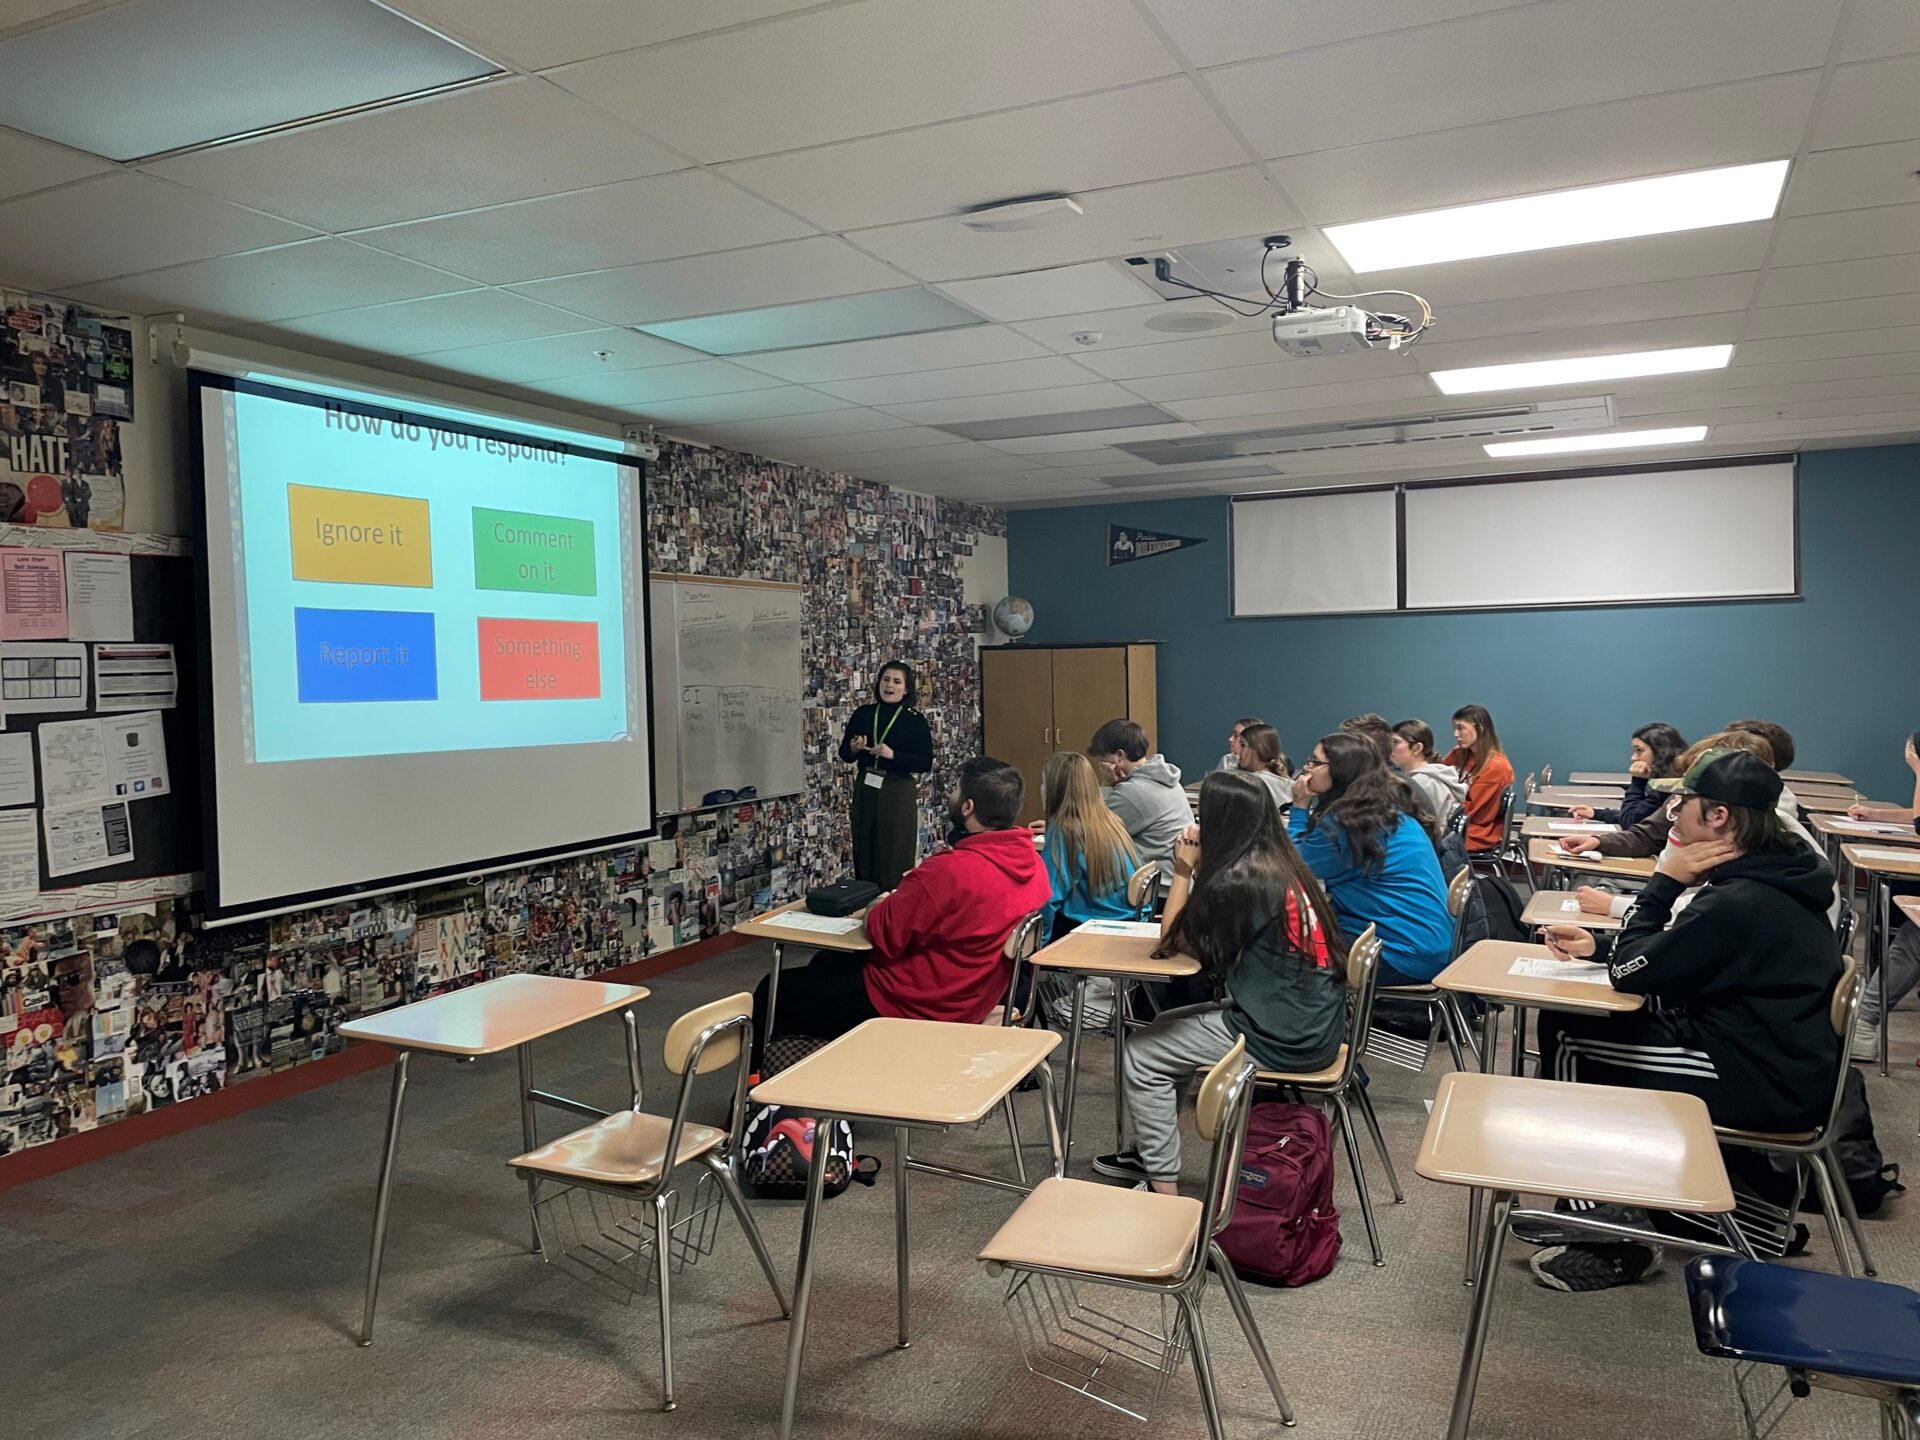 MMOT Extension Combat Hate: A Digital Media Literacy Workshop launches at Huntley High School